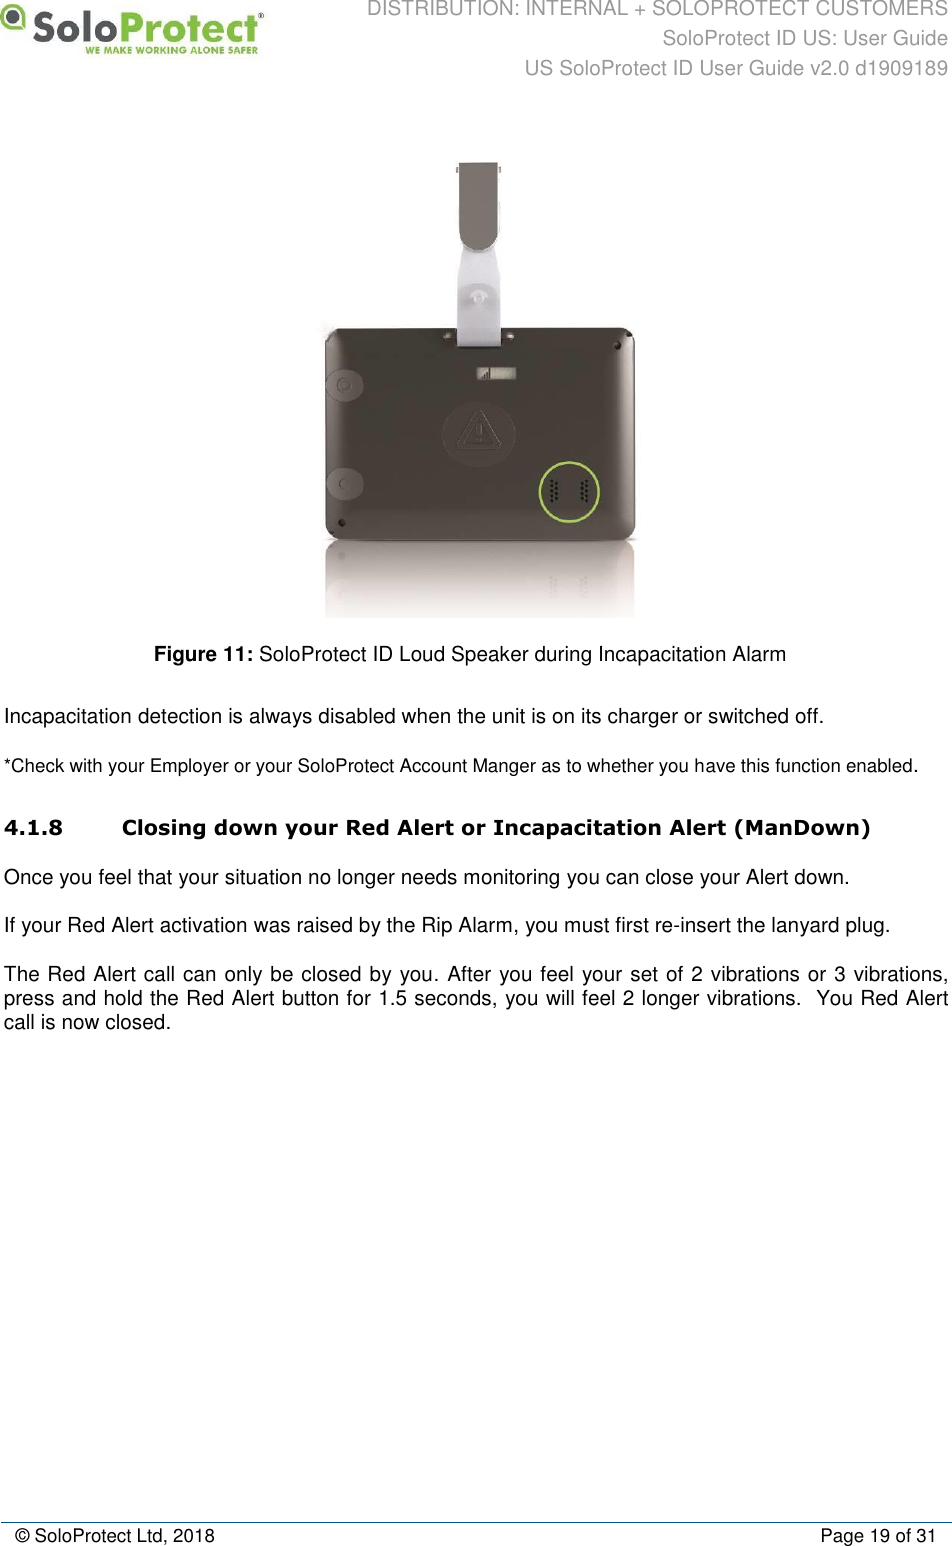 DISTRIBUTION: INTERNAL + SOLOPROTECT CUSTOMERS SoloProtect ID US: User Guide US SoloProtect ID User Guide v2.0 d1909189  © SoloProtect Ltd, 2018  Page 19 of 31  Figure 11: SoloProtect ID Loud Speaker during Incapacitation Alarm Incapacitation detection is always disabled when the unit is on its charger or switched off. *Check with your Employer or your SoloProtect Account Manger as to whether you have this function enabled. 4.1.8 Closing down your Red Alert or Incapacitation Alert (ManDown) Once you feel that your situation no longer needs monitoring you can close your Alert down. If your Red Alert activation was raised by the Rip Alarm, you must first re-insert the lanyard plug. The Red Alert call can only be closed by you. After you feel your set of 2 vibrations or 3 vibrations, press and hold the Red Alert button for 1.5 seconds, you will feel 2 longer vibrations.  You Red Alert call is now closed. 